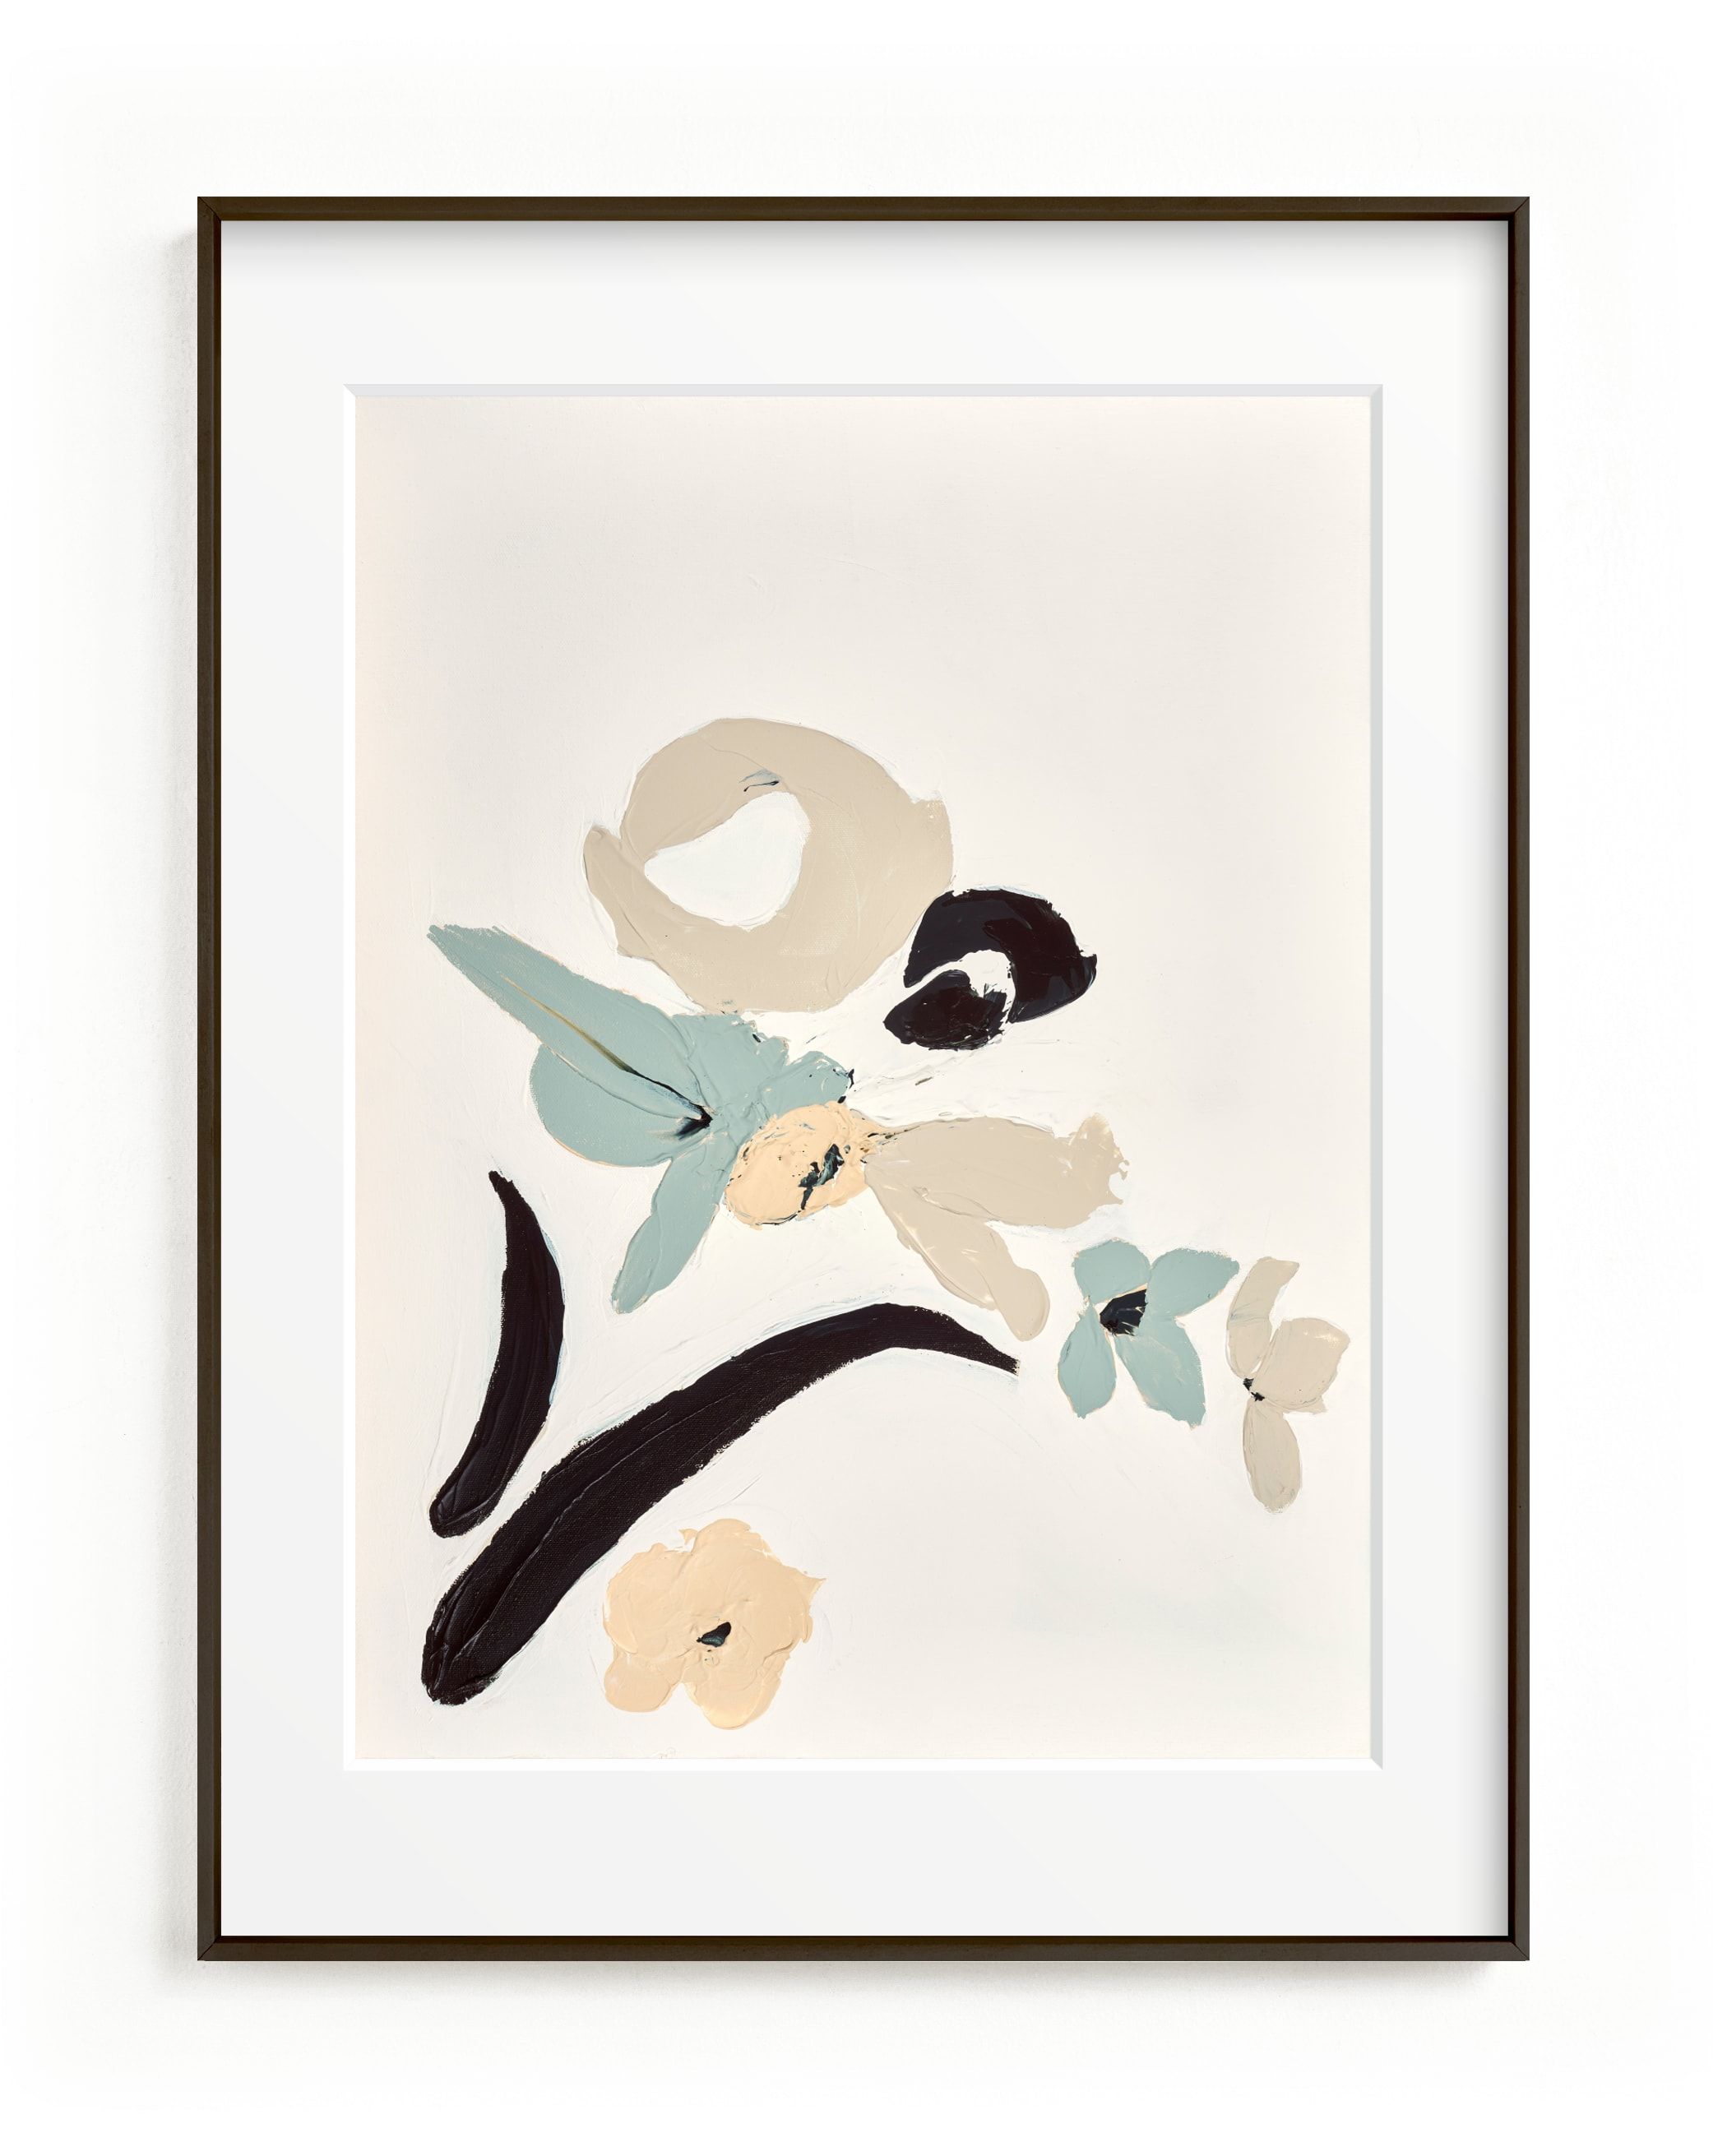 "Windswept Diptych 1" - Painting Limited Edition Art Print by Caryn Owen. | Minted